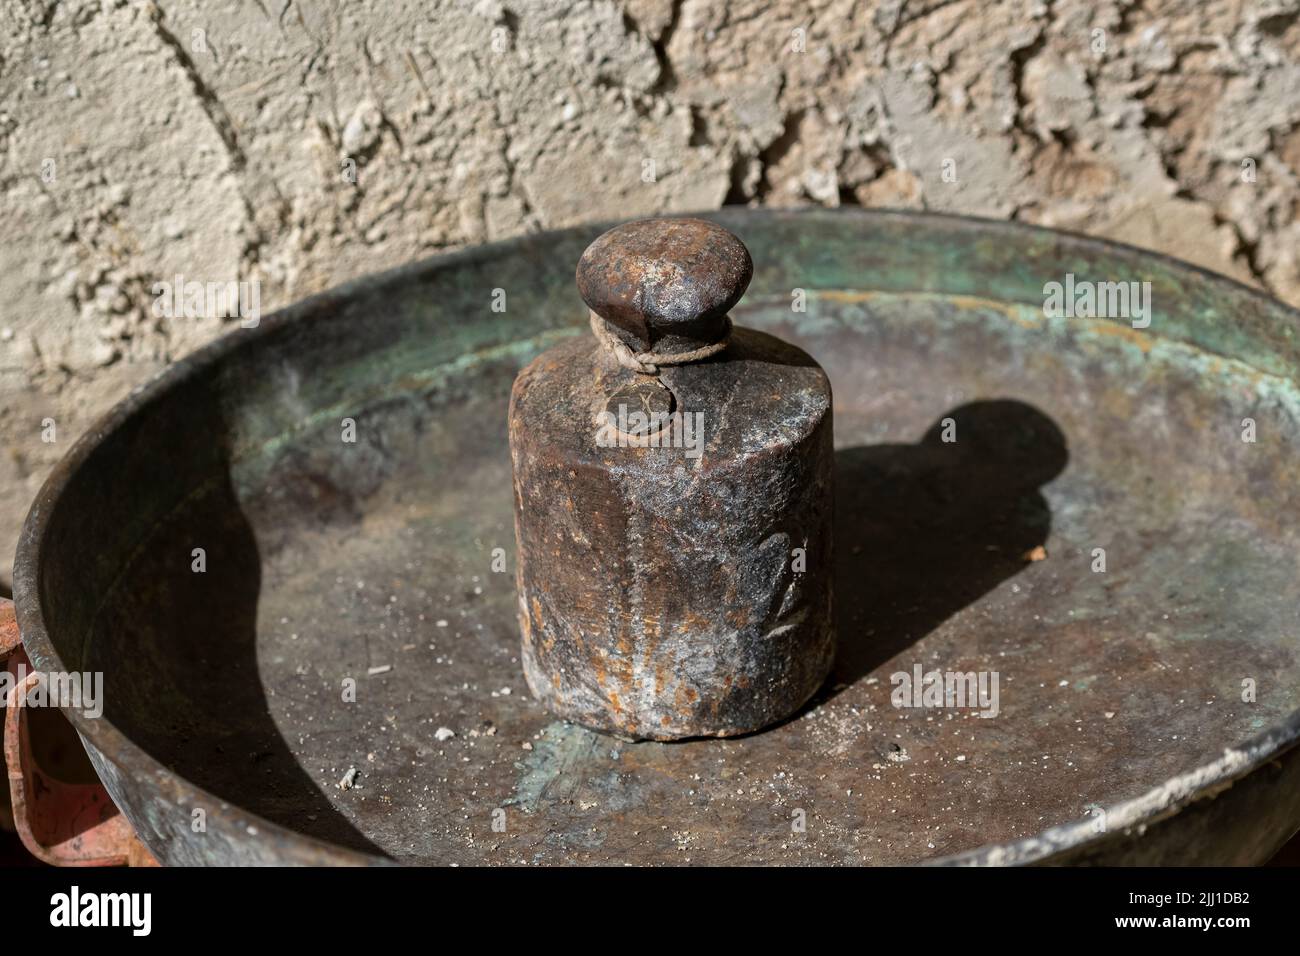 https://c8.alamy.com/comp/2JJ1DB2/selective-focus-shot-of-iron-kilogram-scale-placed-in-old-metal-container-2JJ1DB2.jpg